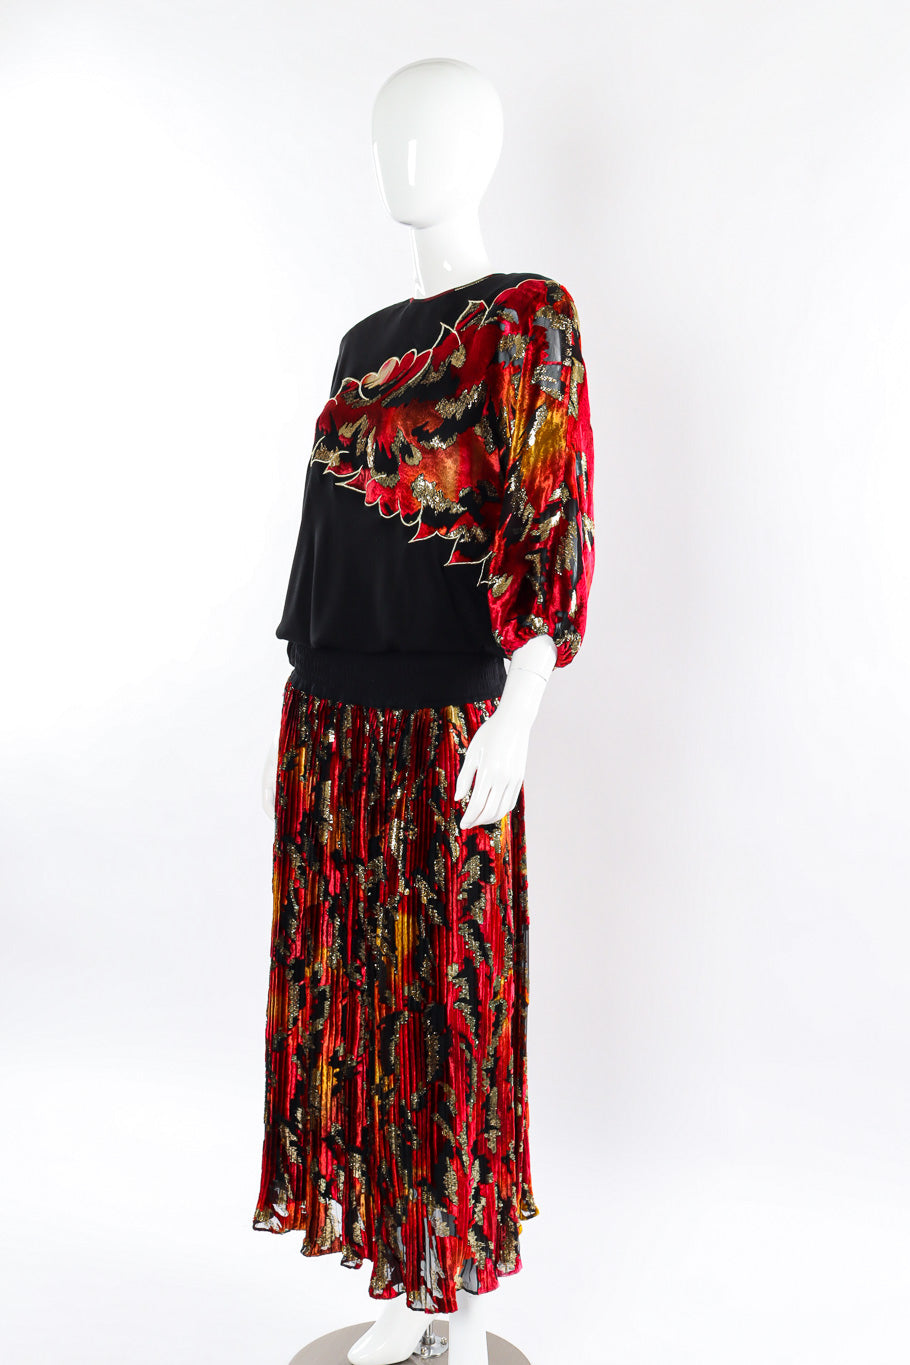 Multi-printed silk limited edition dress by Diane Freis mannequin angled with no scarf  @recessla